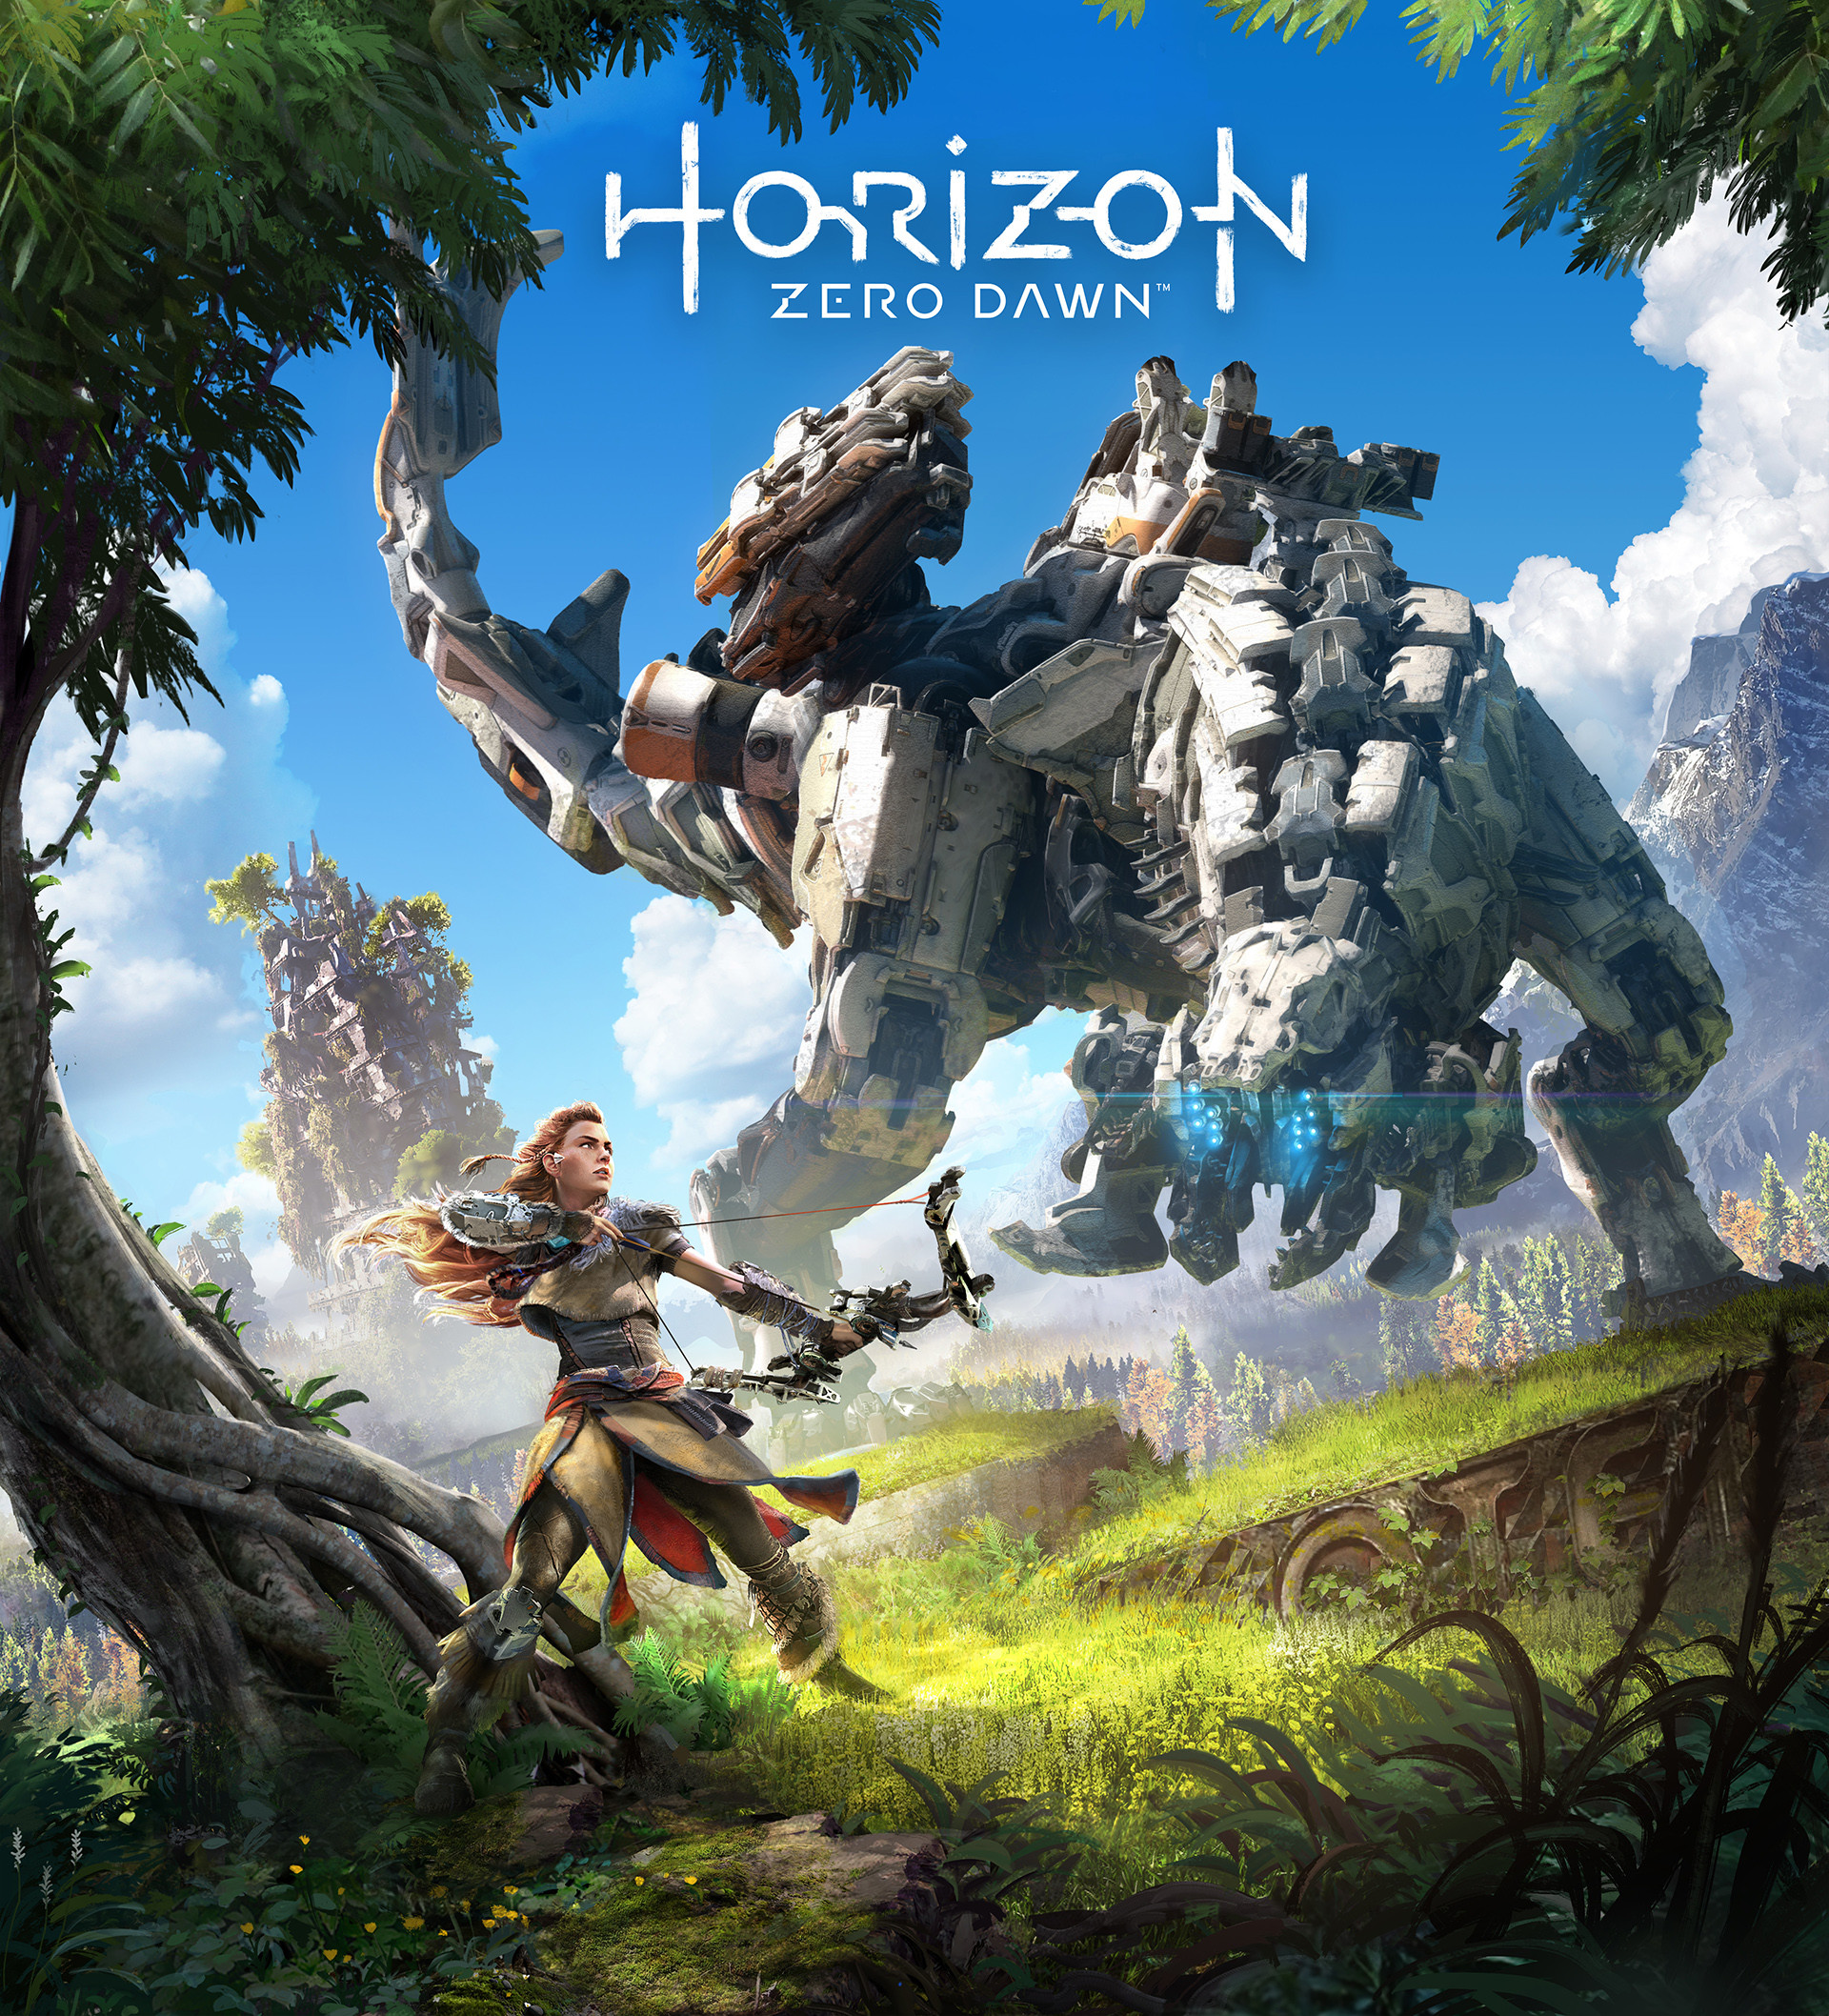 Scavenger went on the compose the scores of blockbuster games like Horizon Zero Dawn and Killzone.